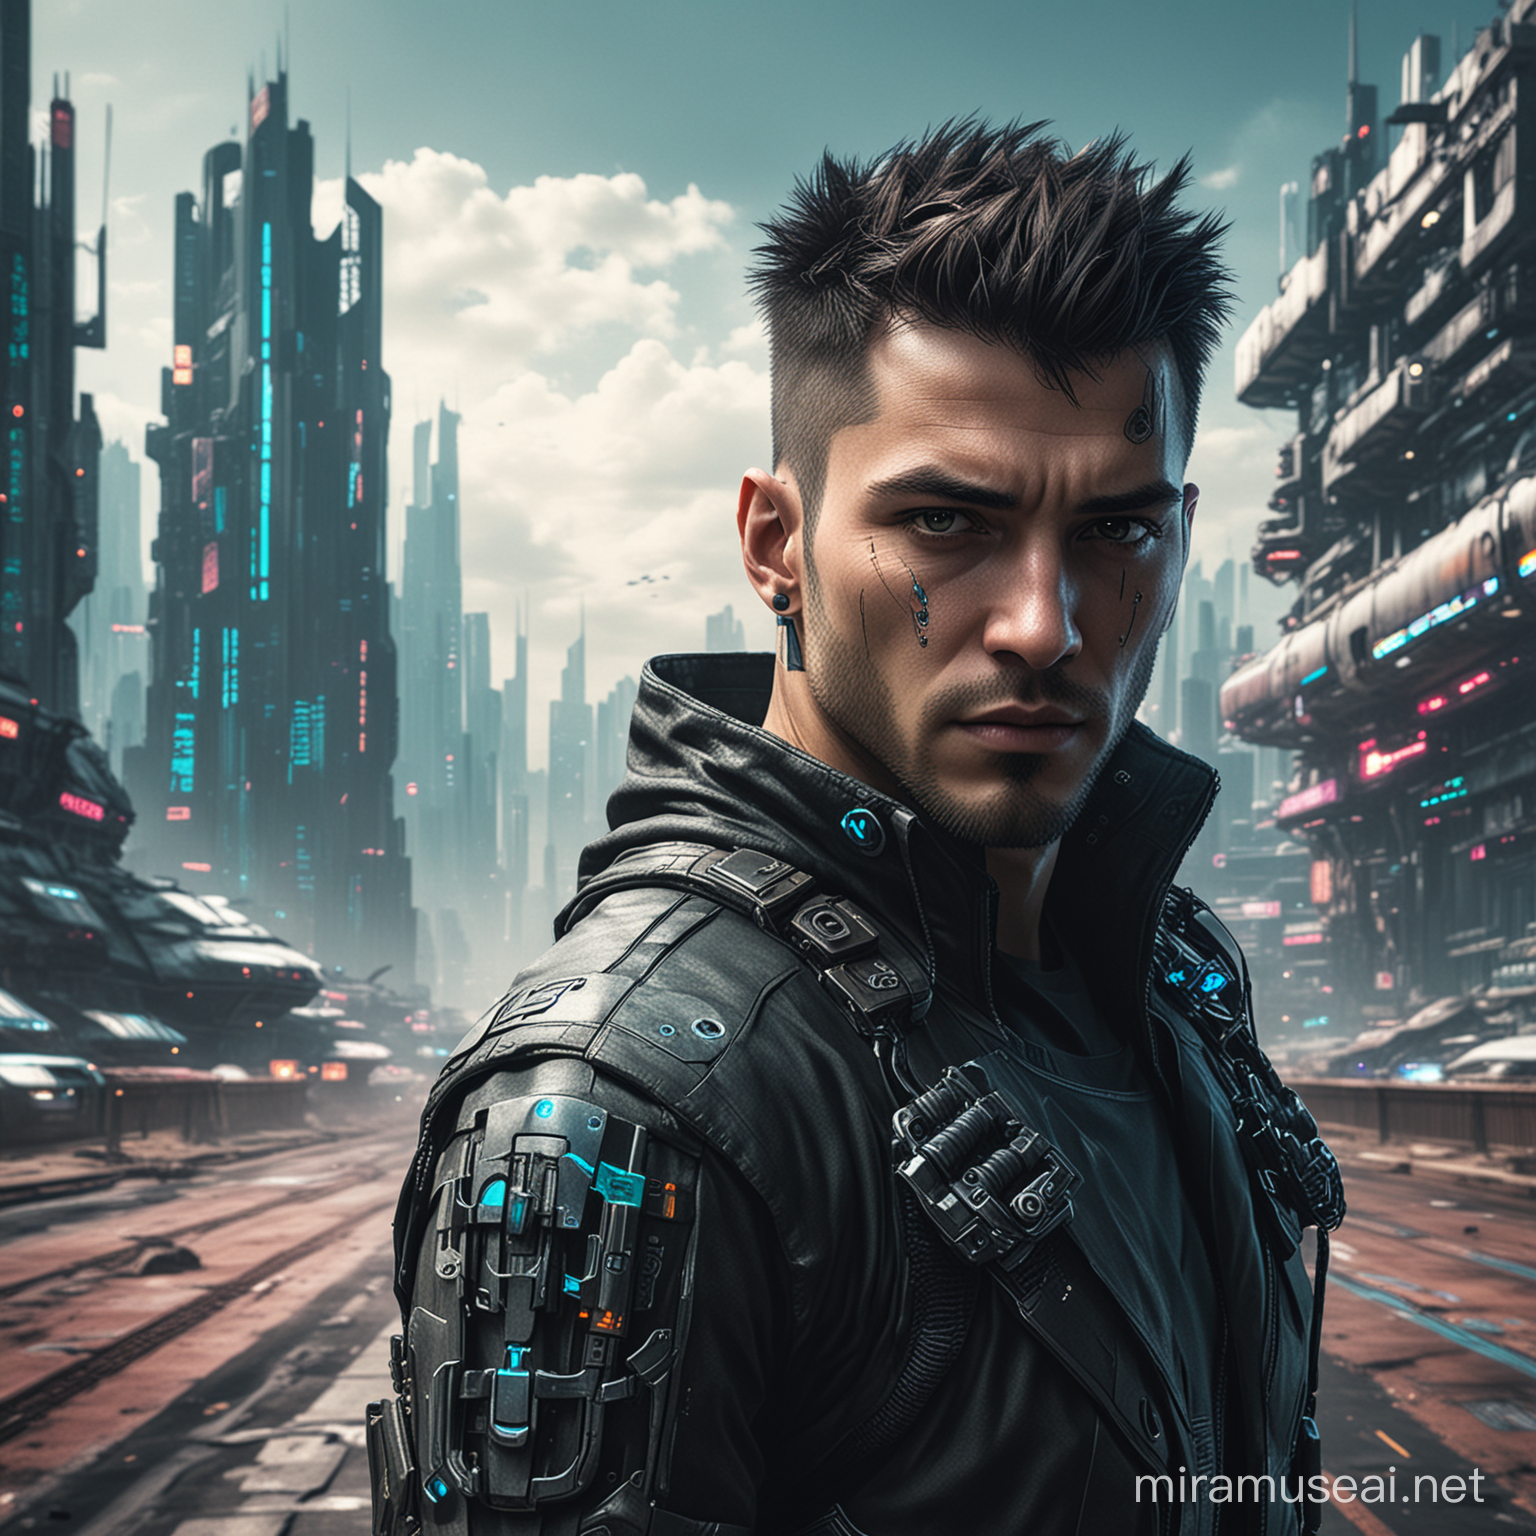 cyberpunk man looking ahead, with a modern futuristic landscape in the background